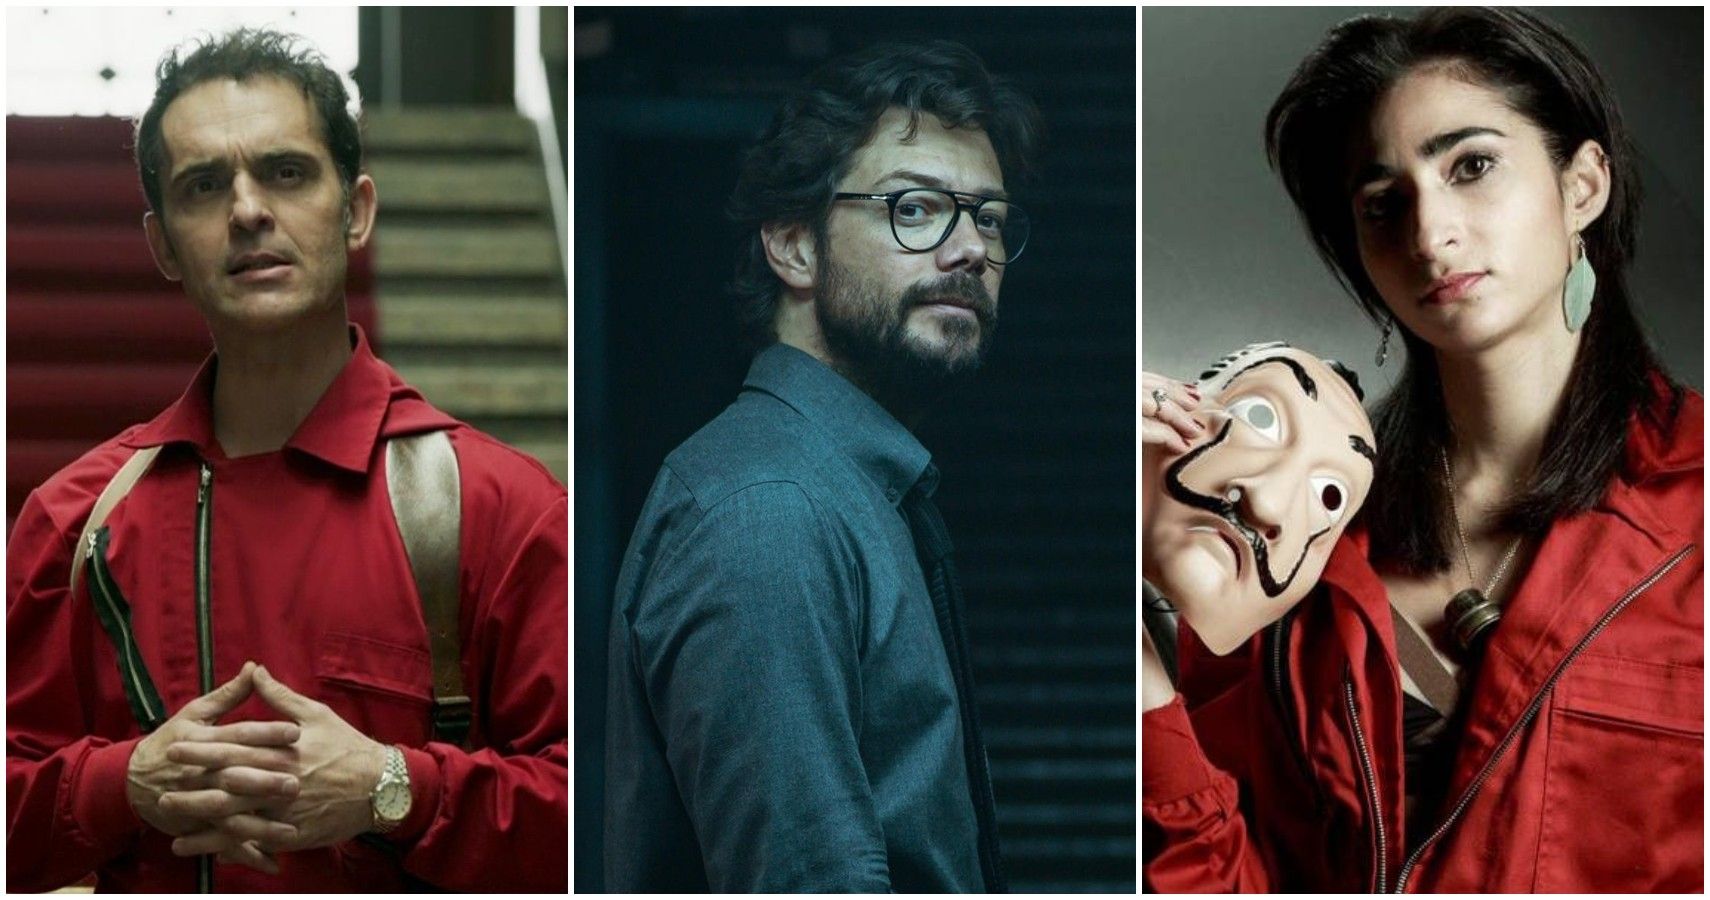 Money Heist What Your Favorite Character Says About You